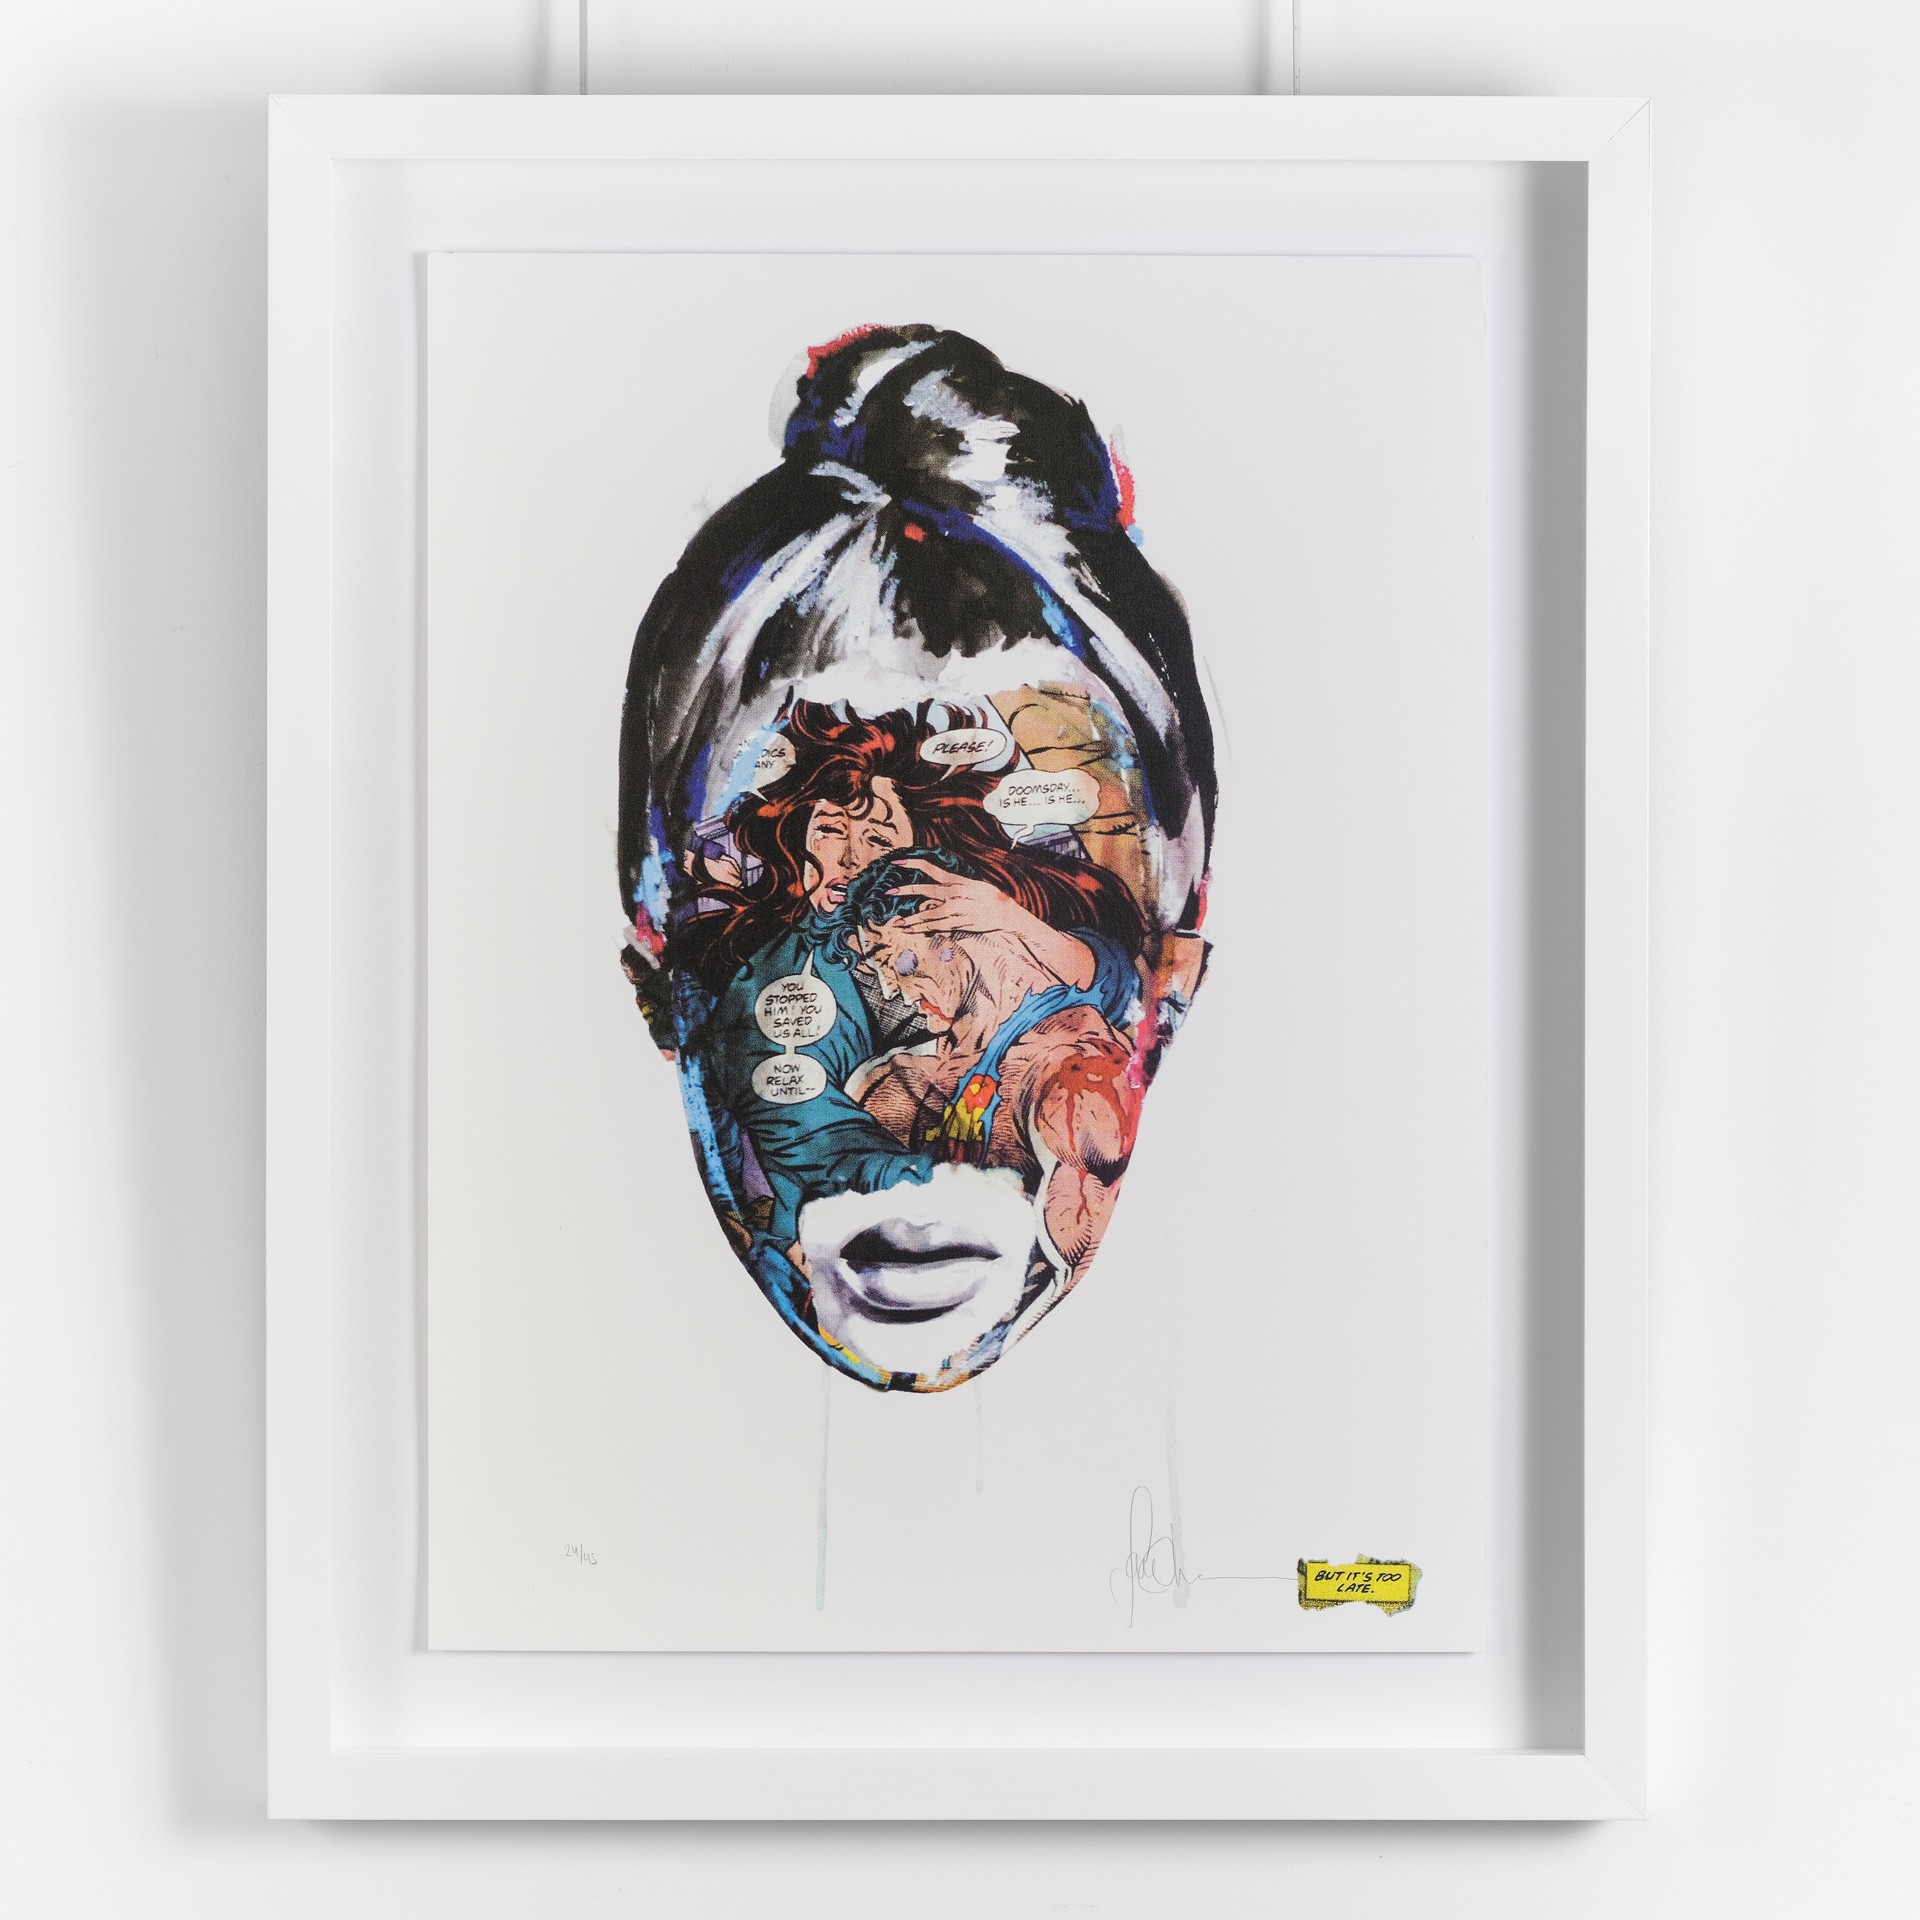 La Cage ; when it is too late by Sandra Chevrier